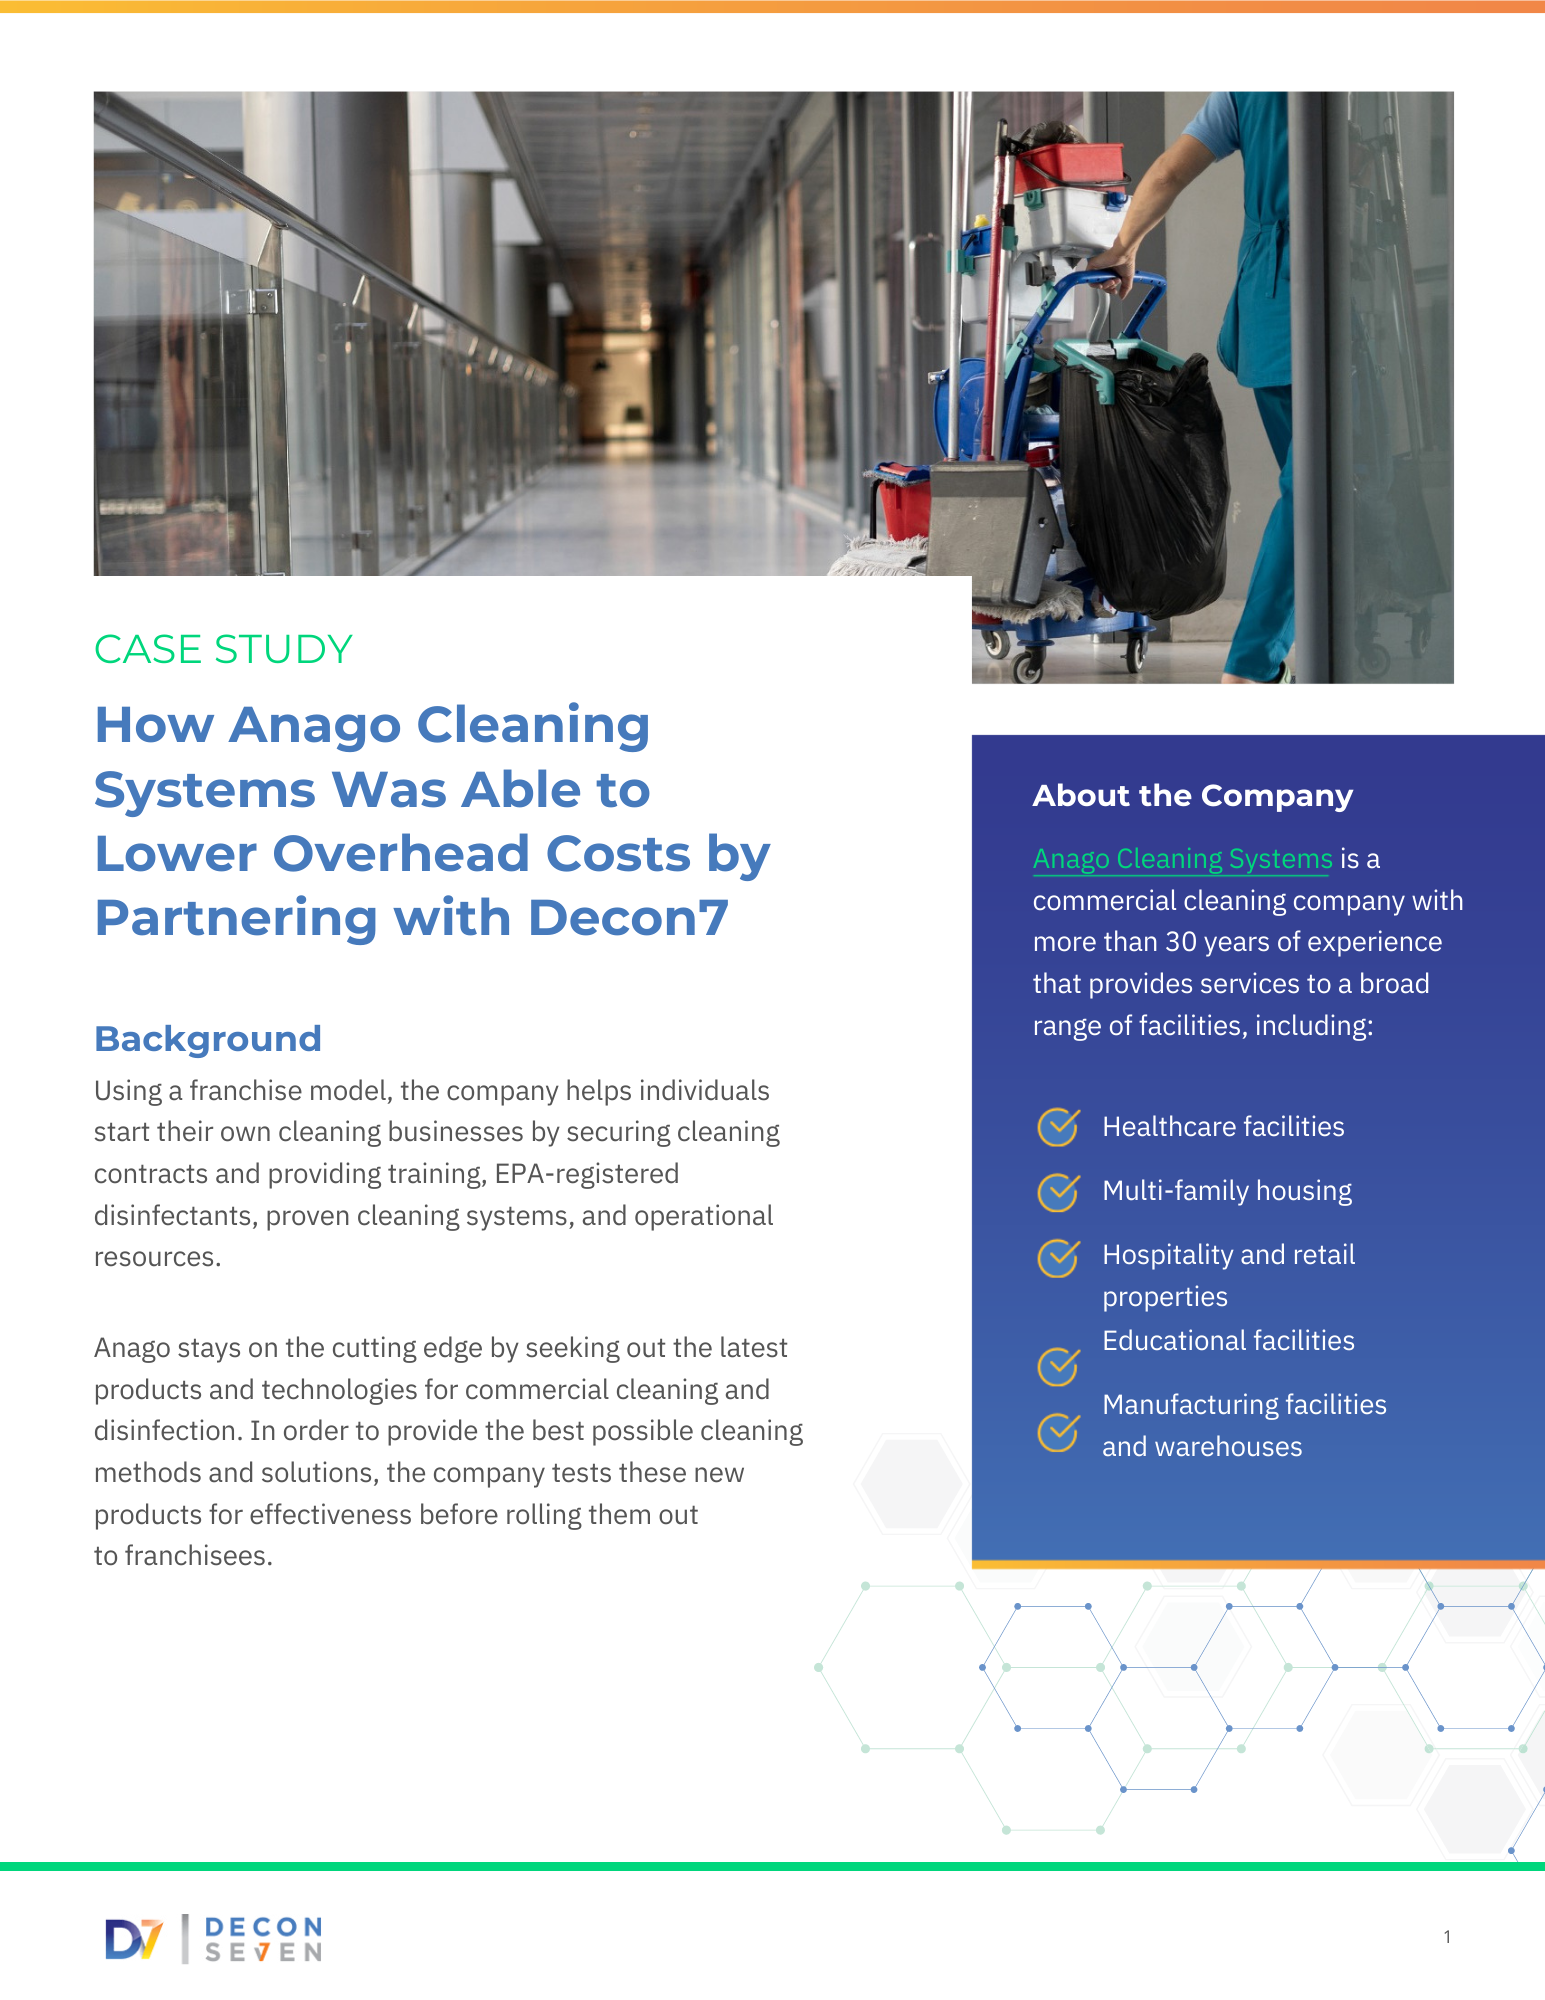 D7-CaseStudy-Anago Cleaning Systems-1545x2000